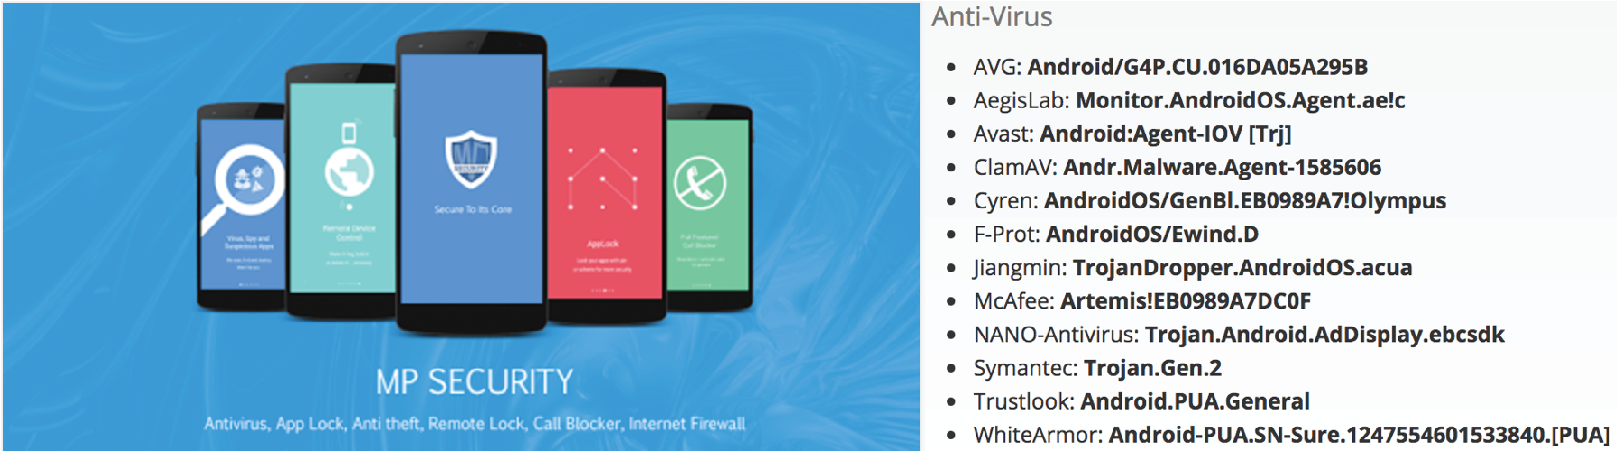 Antivirus mobile apps are leveraging the threat of malware infections to drive downloads of potentially unwanted programs, useless mobile apps, and malware.